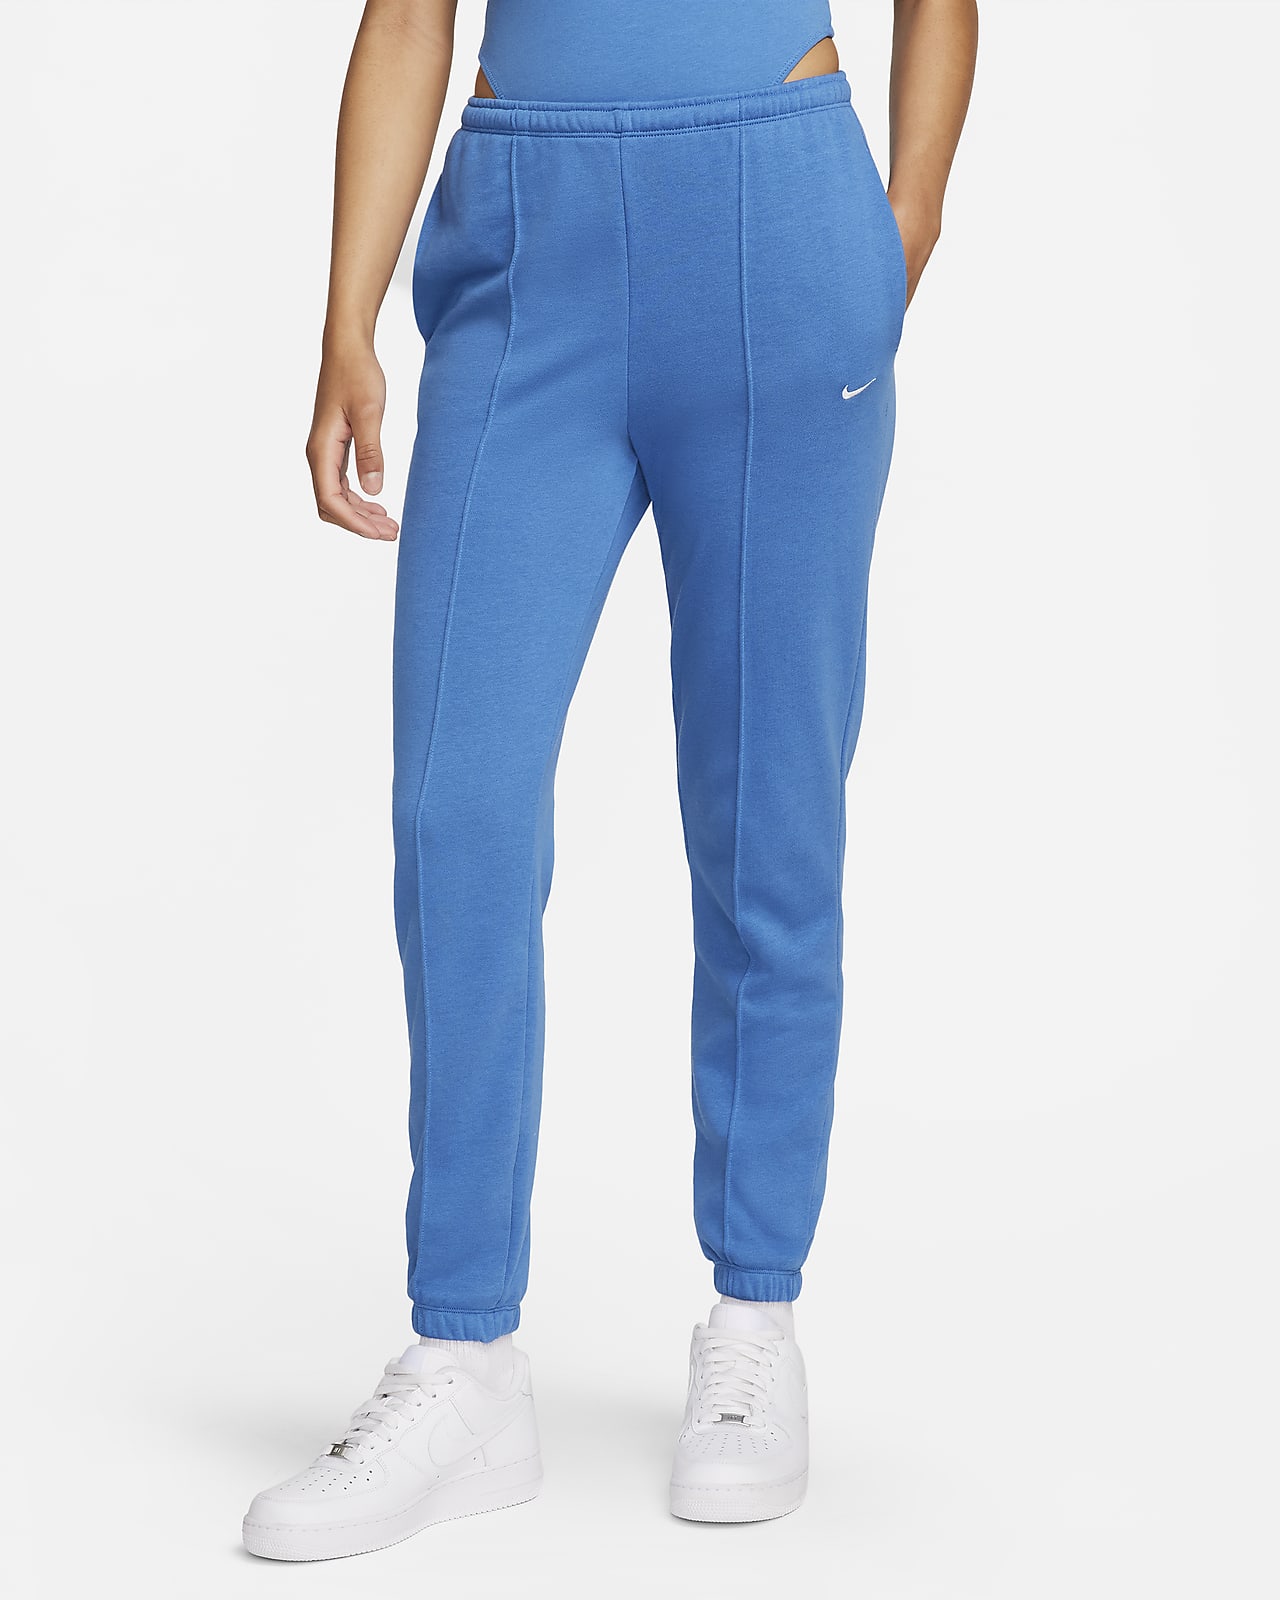 Nike Sportswear Chill Terry Women's Slim High-Waisted French Terry  Sweatpants.